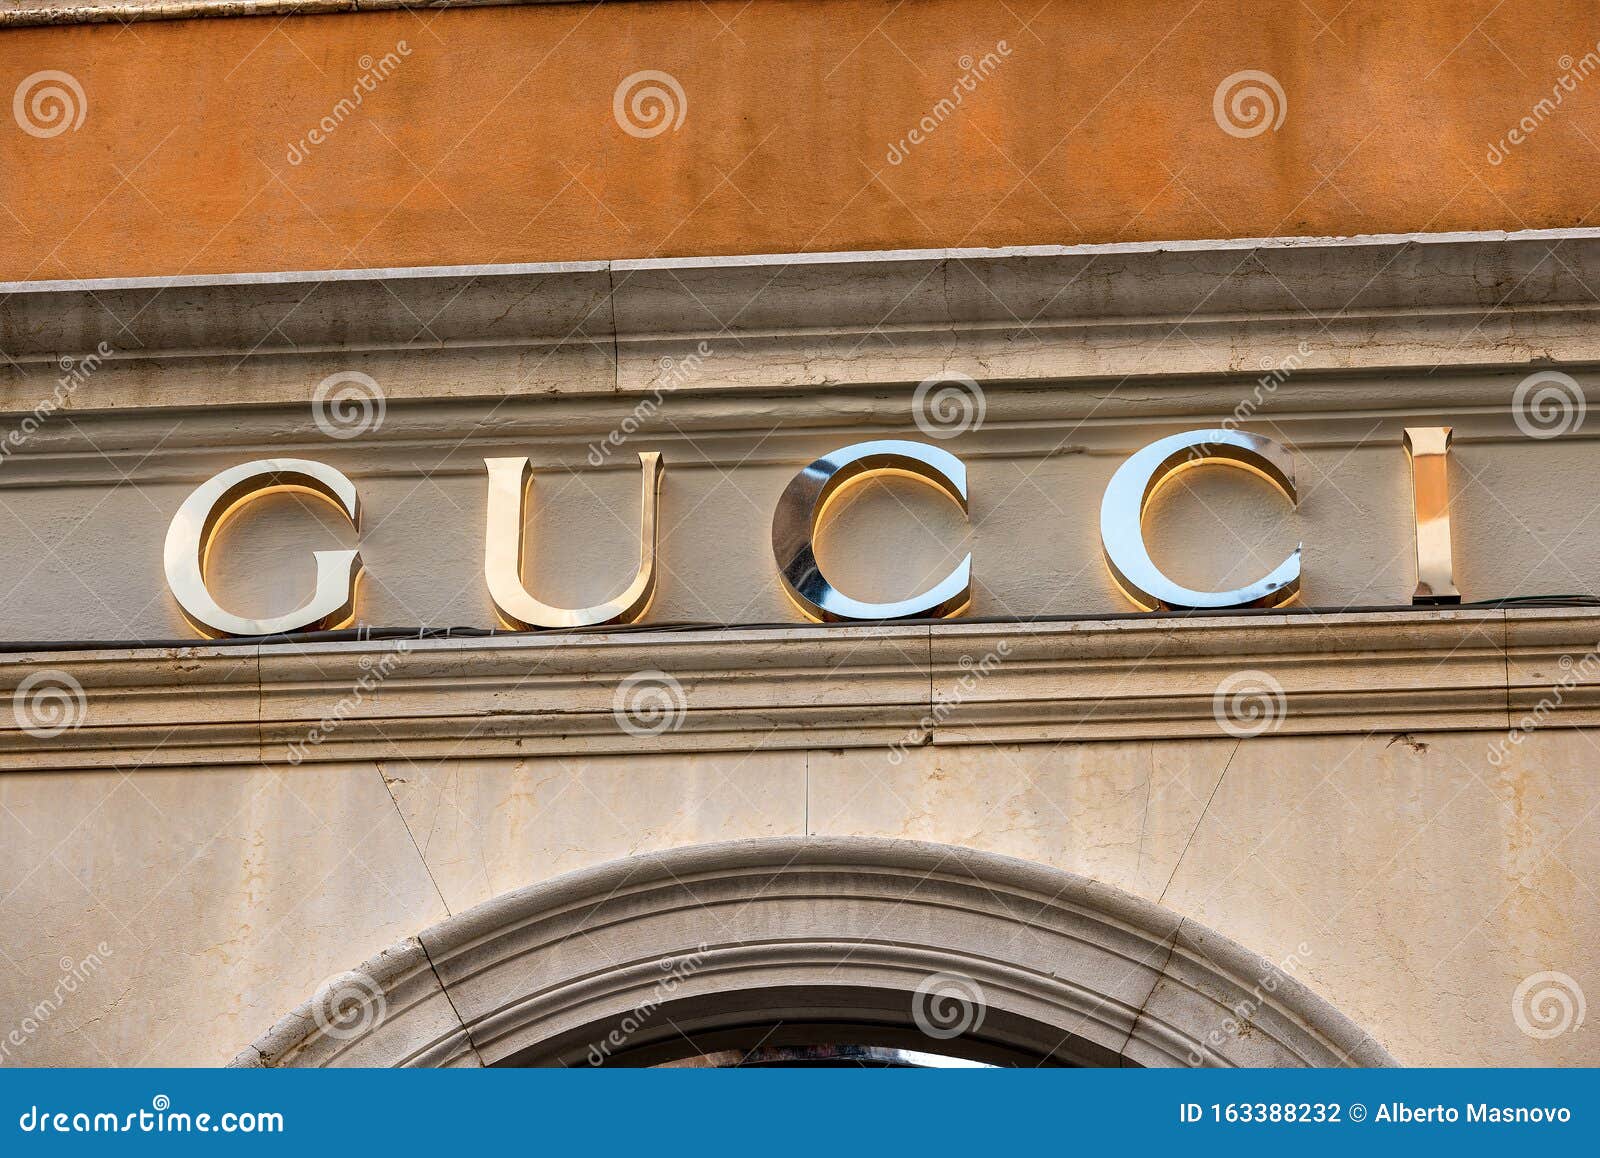 Closeup Of A Gucci Brand Name - Luxury Store In Venice Italy Editorial Photography - Image of ...